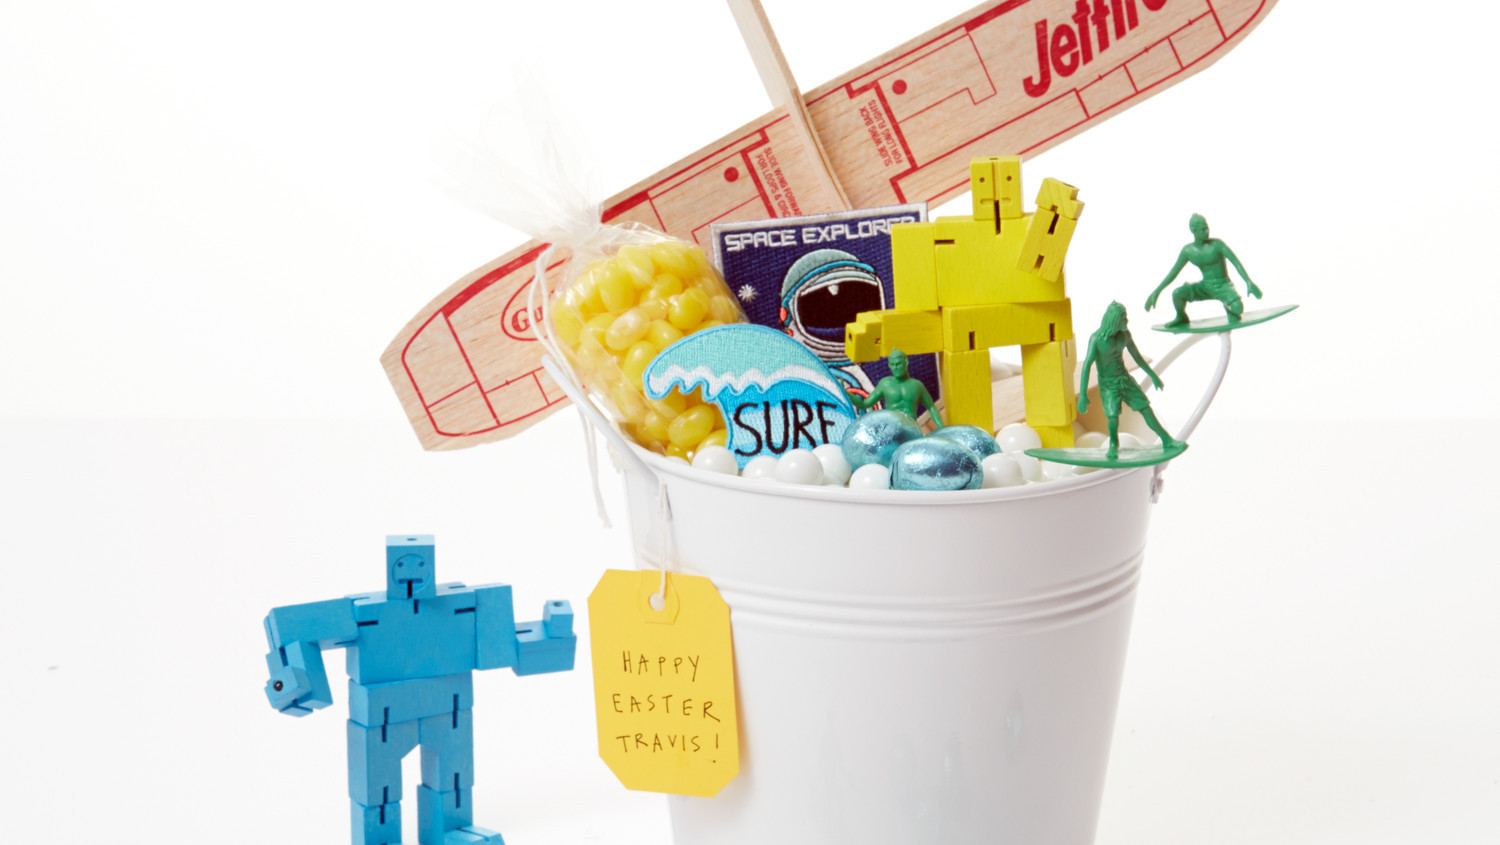 Boys Easter Basket Ideas
 9 Action Packed Easter Basket Ideas for Boys